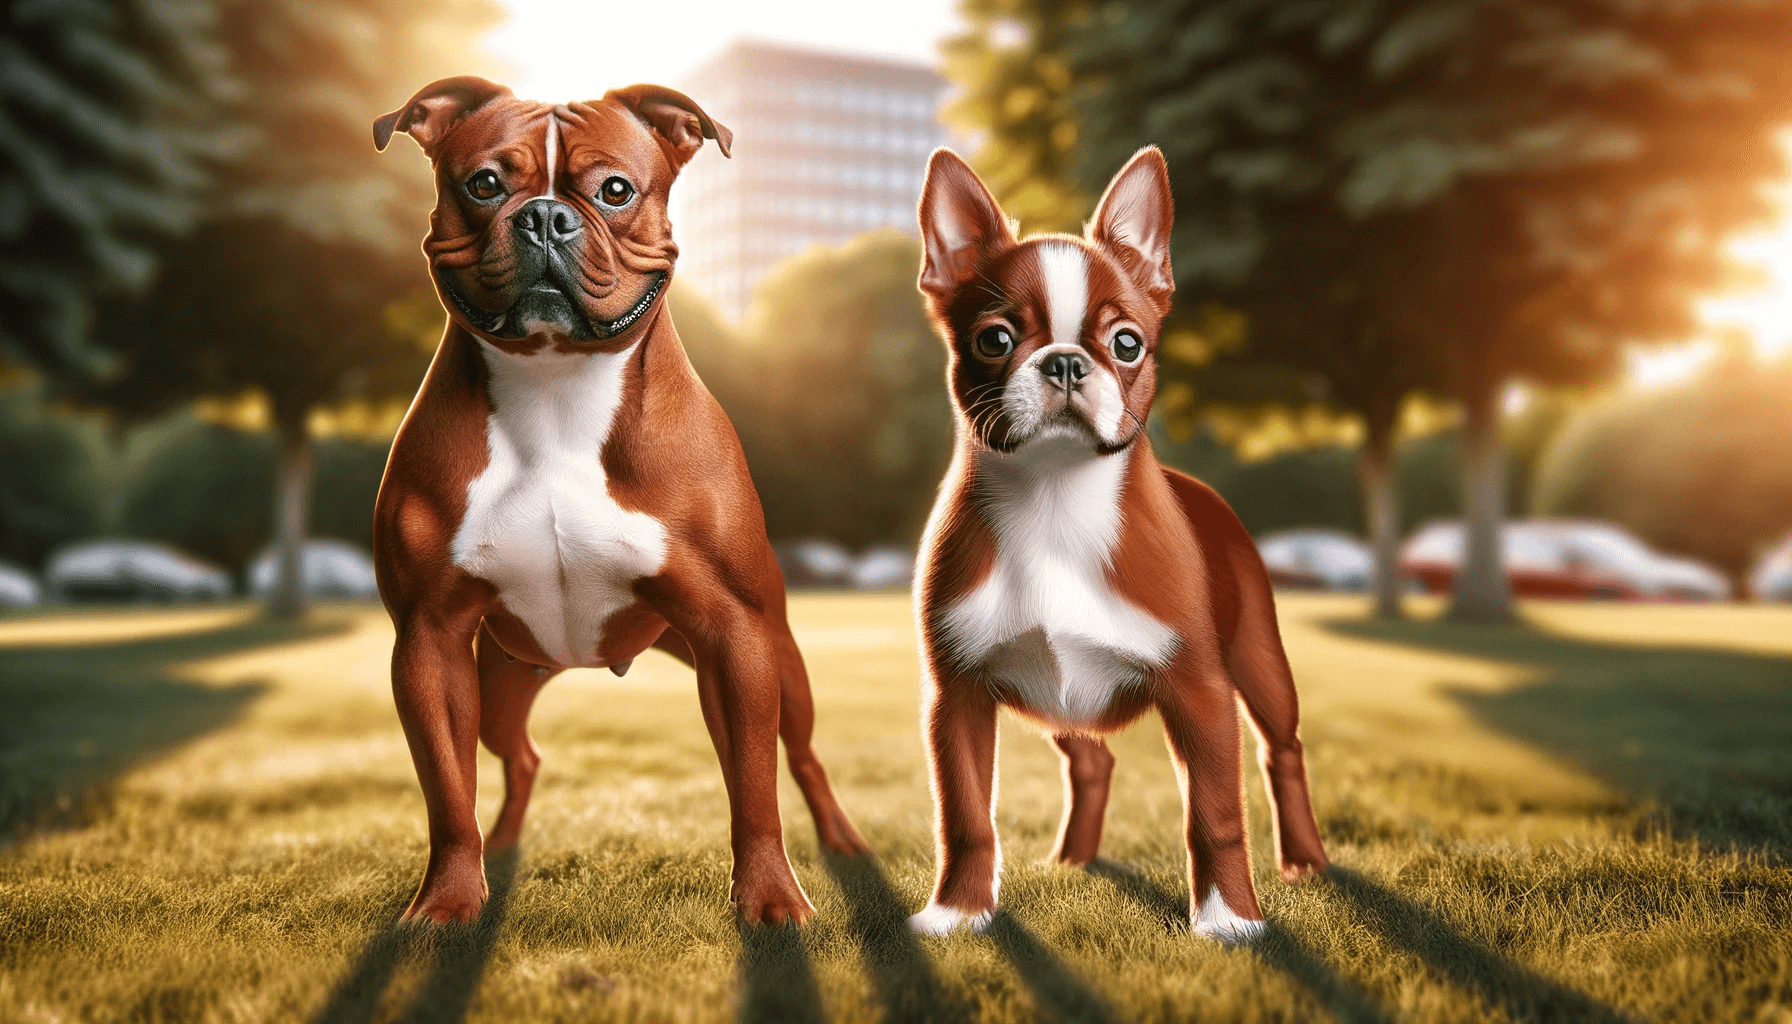 Differences Between Male and Female Red Boston Terriers